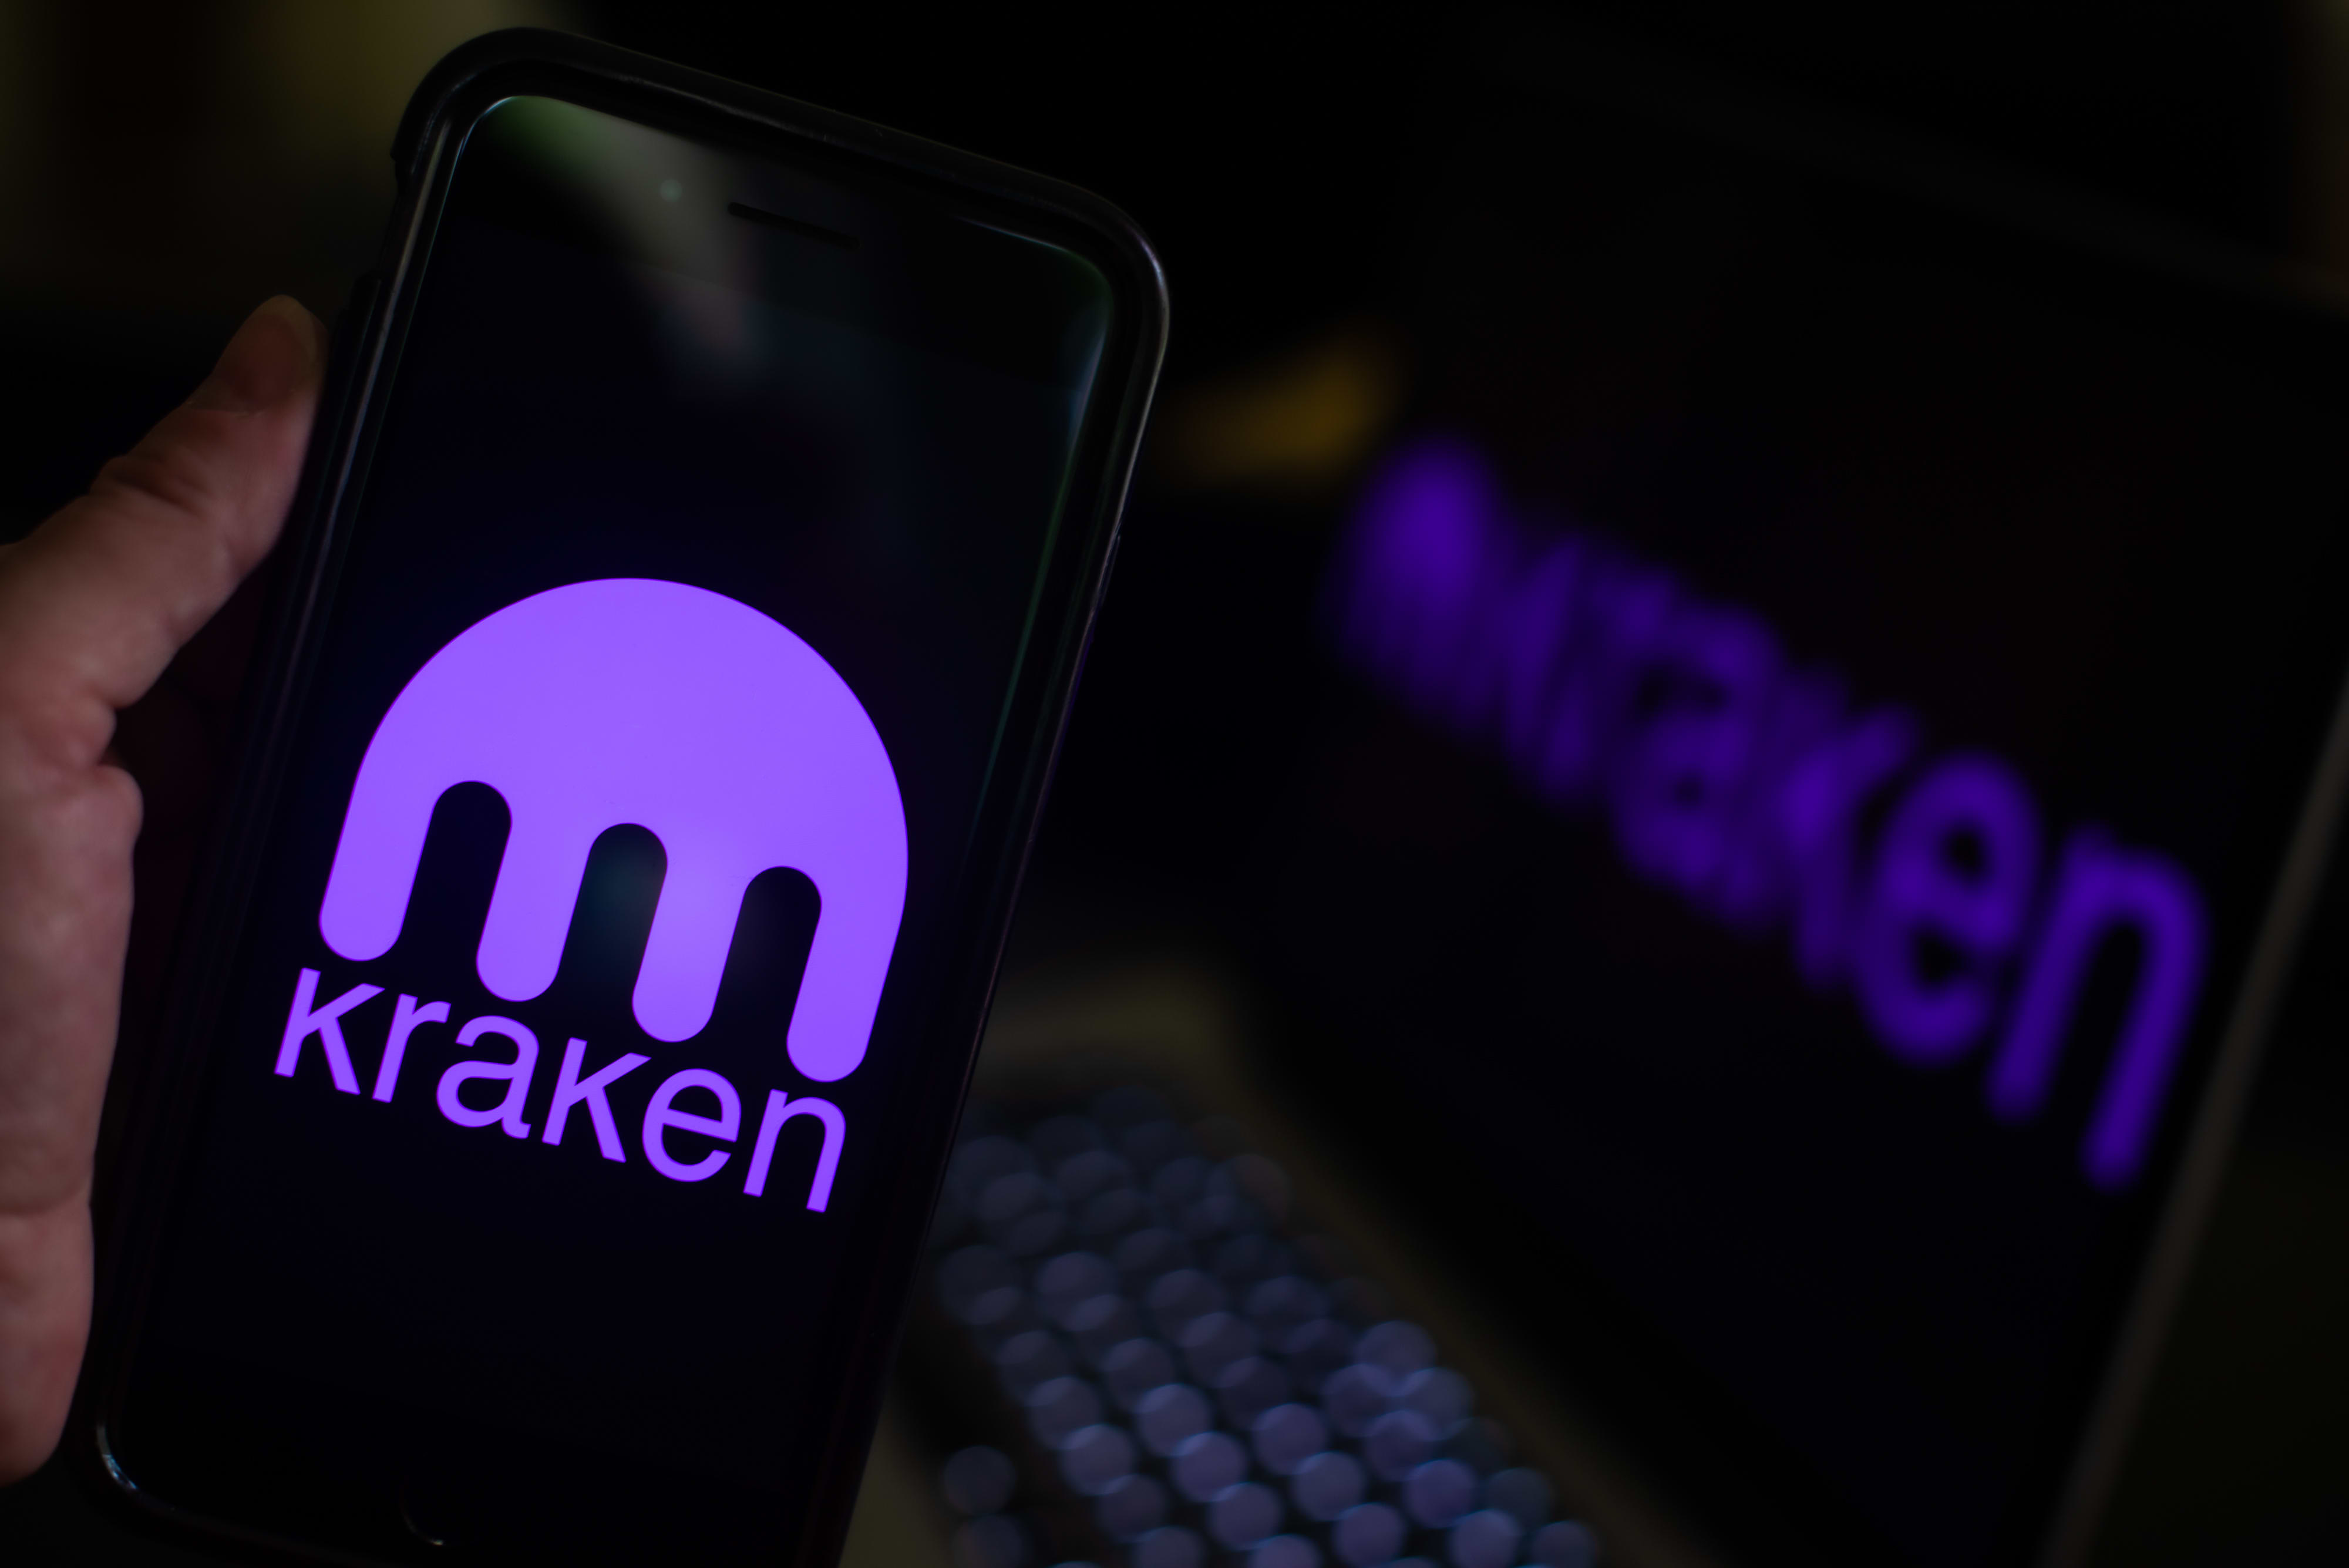 Kraken Co-Founder Jesse Powell Denounces SEC as "Top Decel," Urges Crypto Firms to Leave the US